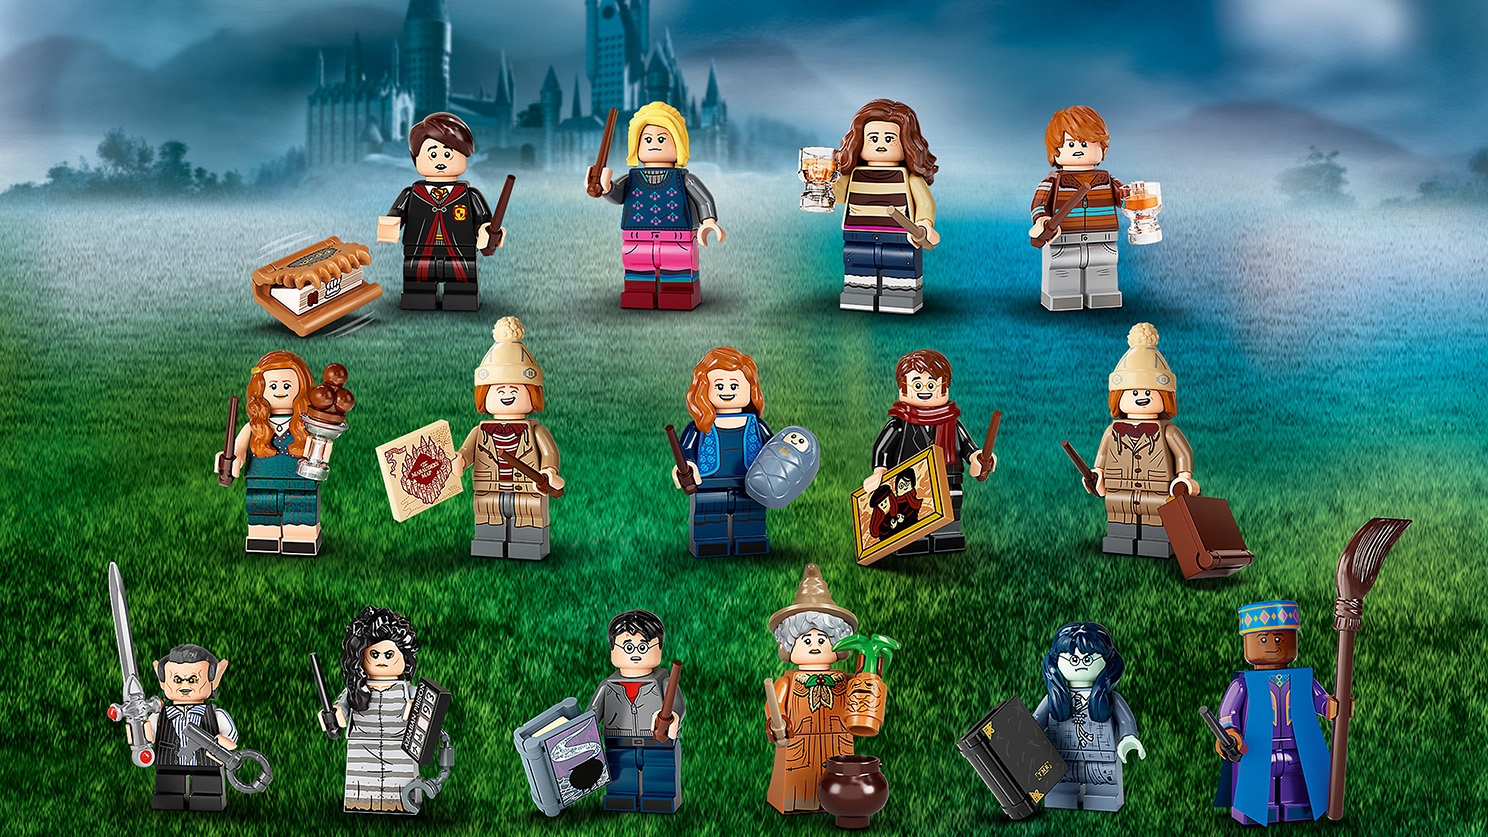 Details about   LEGO Minifigures 71028 HARRY POTTER Series 2 Full Set Of 16 Figures 